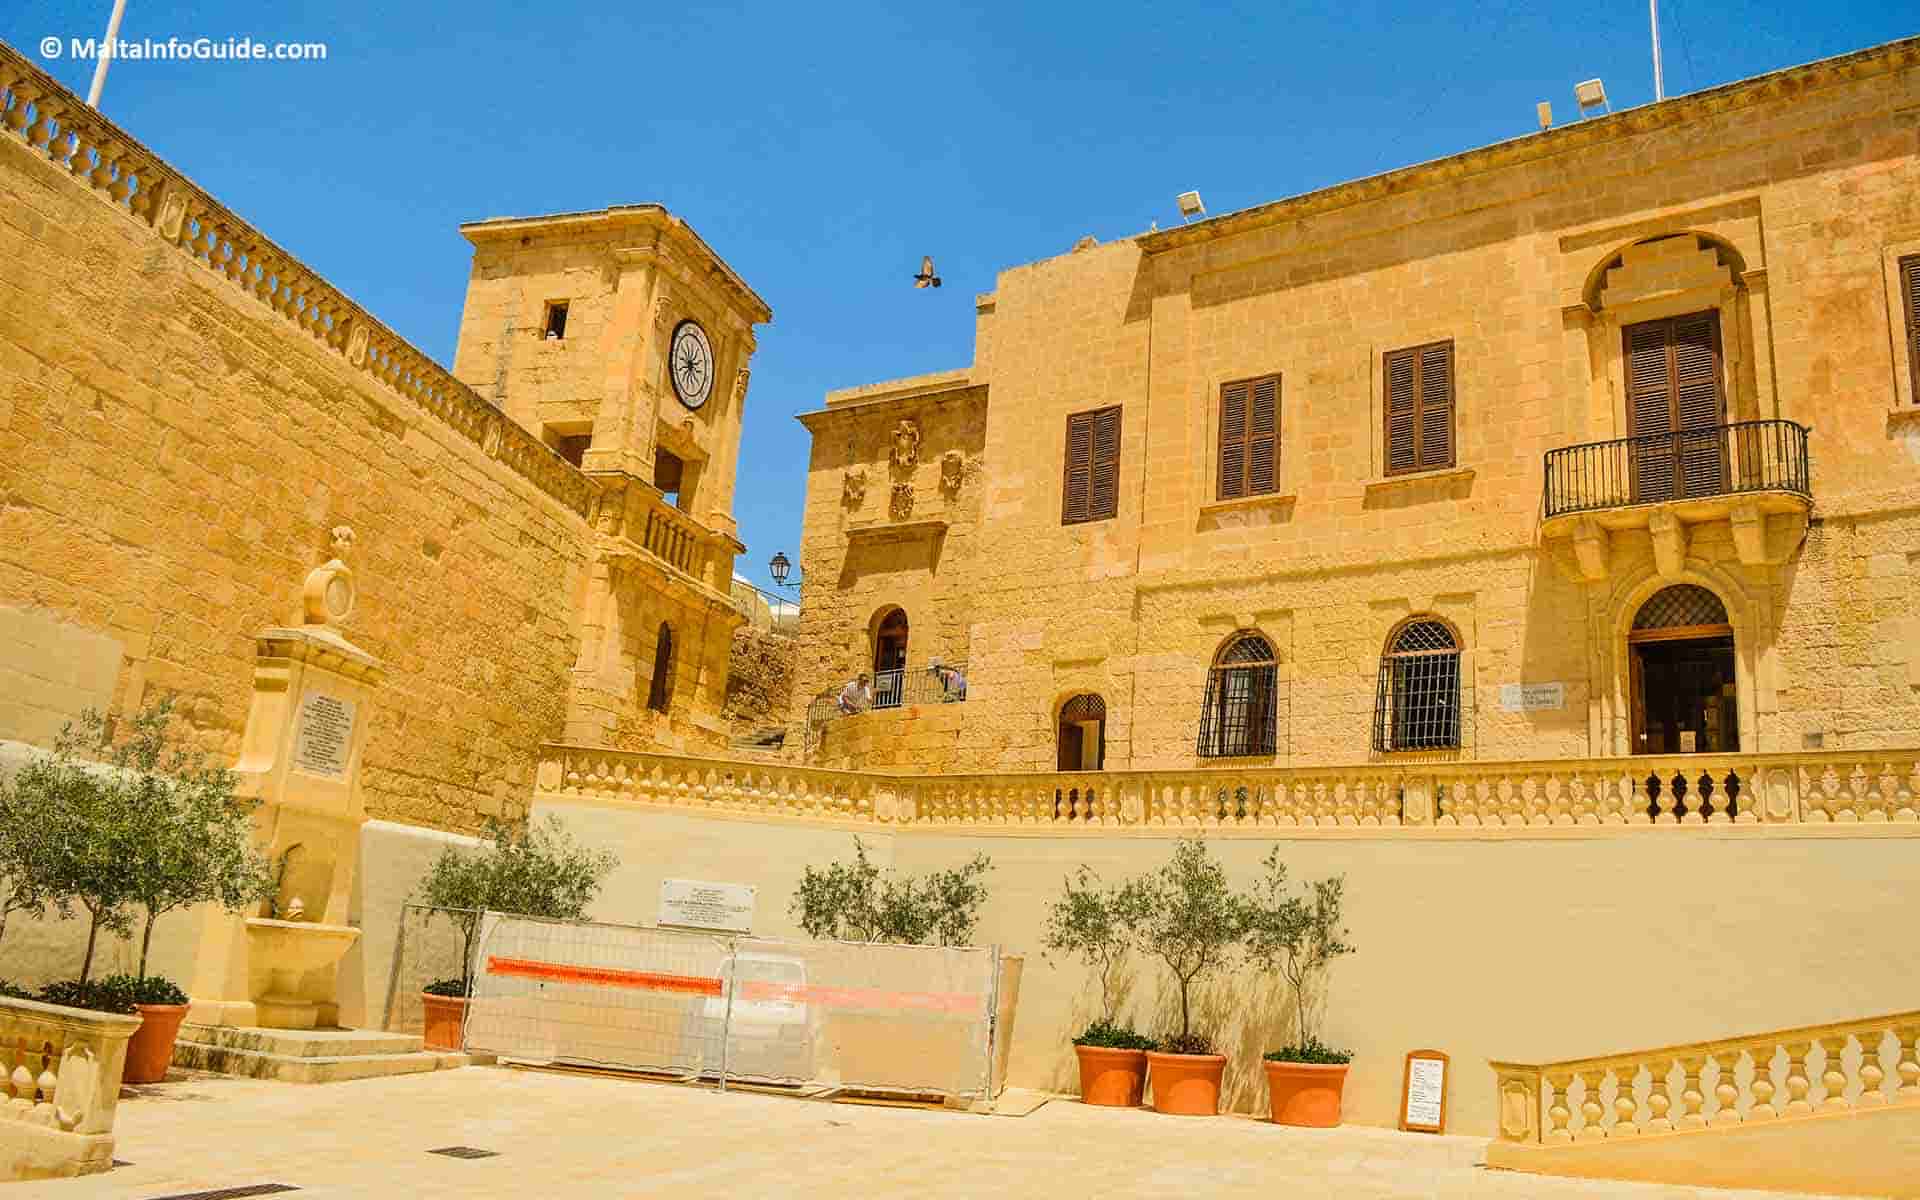 The law courts of Gozo.